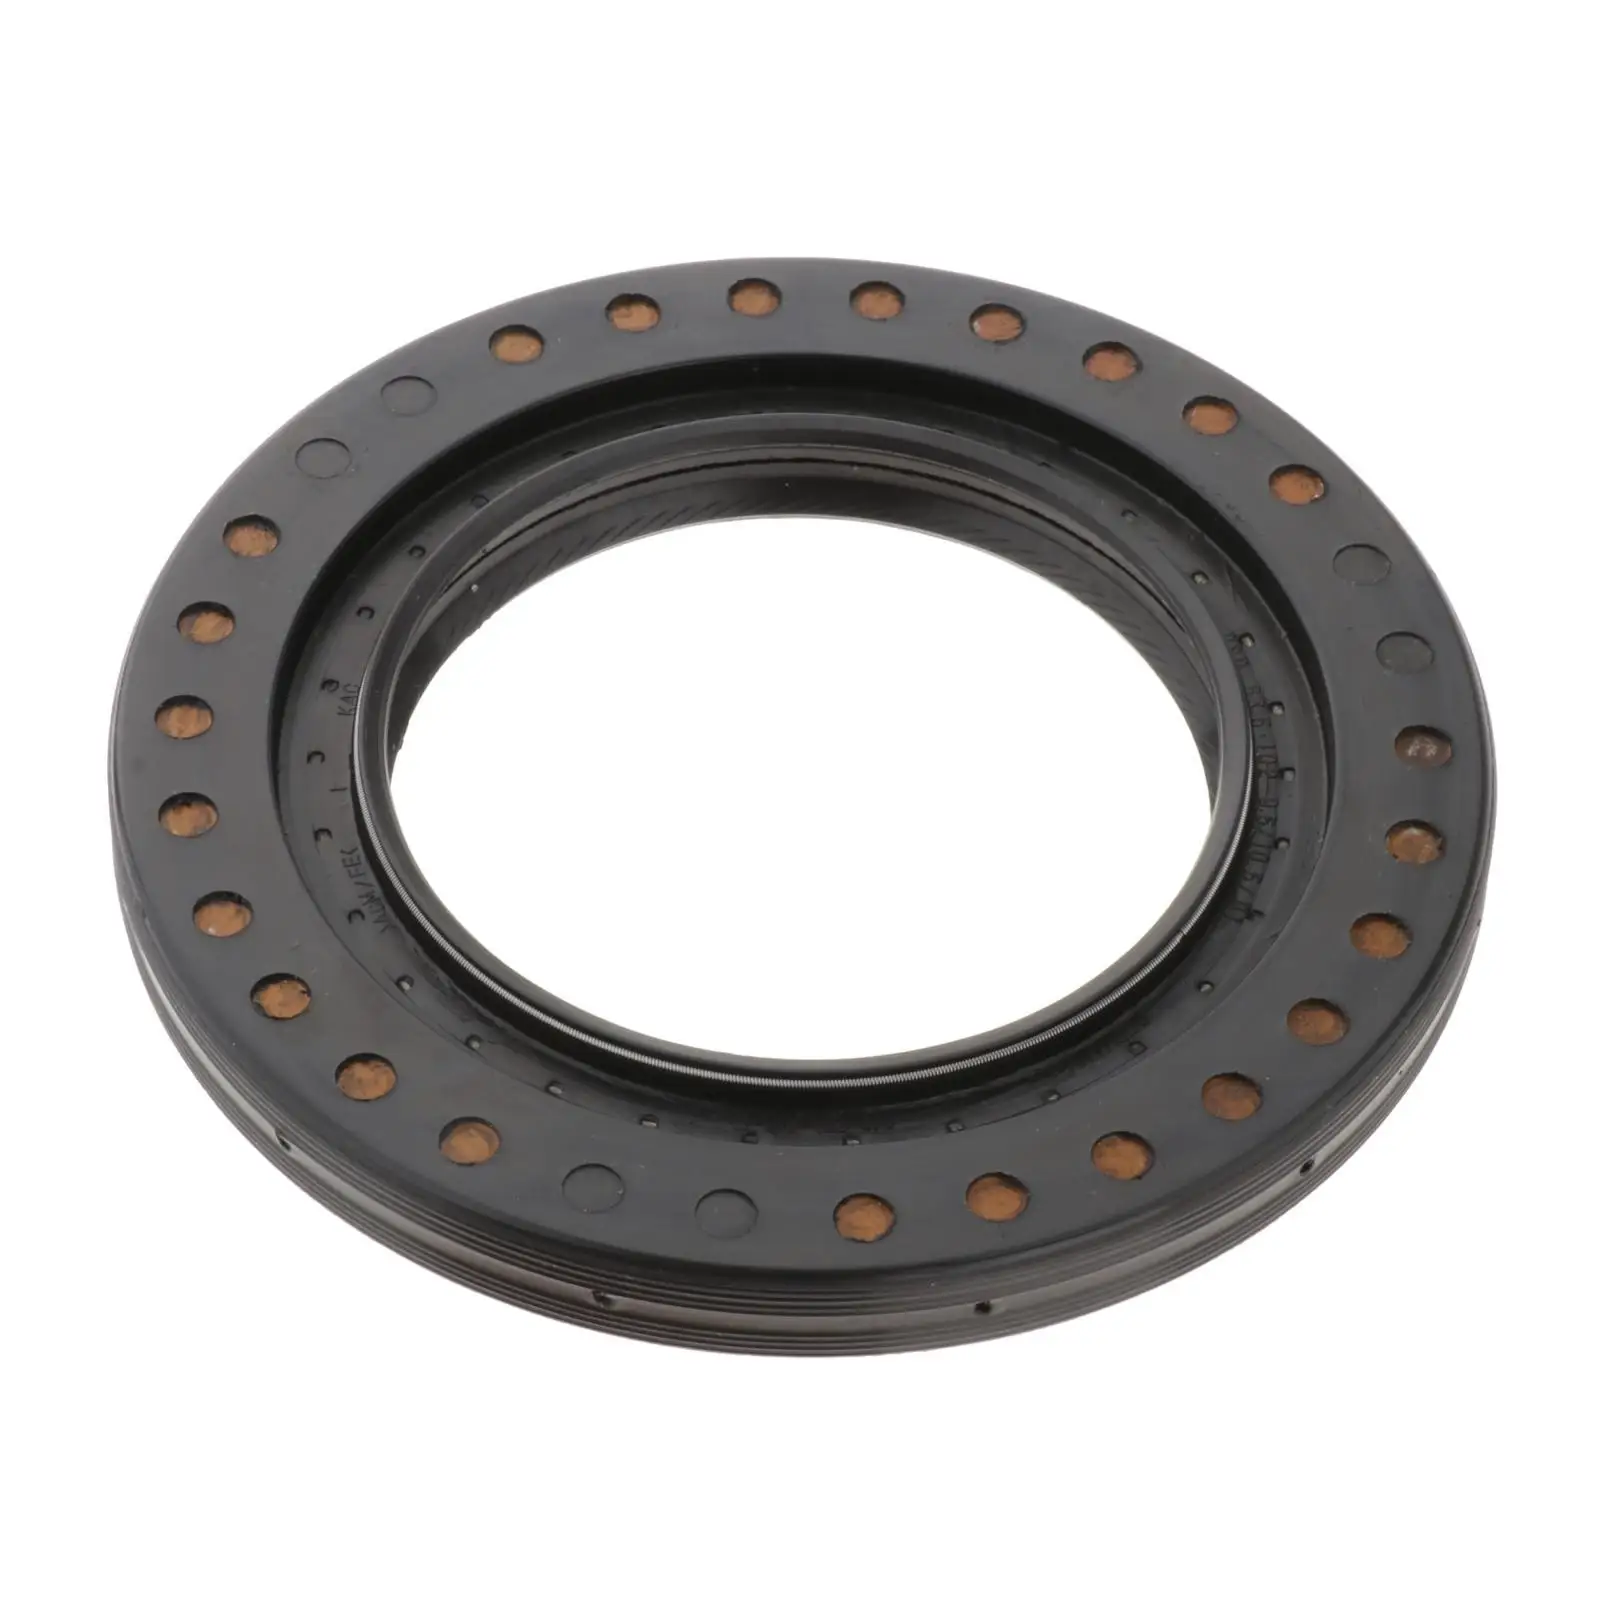 Half Shaft Oil Seal 275075A Double Side Angle Tooth Drive Shaft Oil Seal Fits for Audi A4 A6 A8 for 01T Transmission